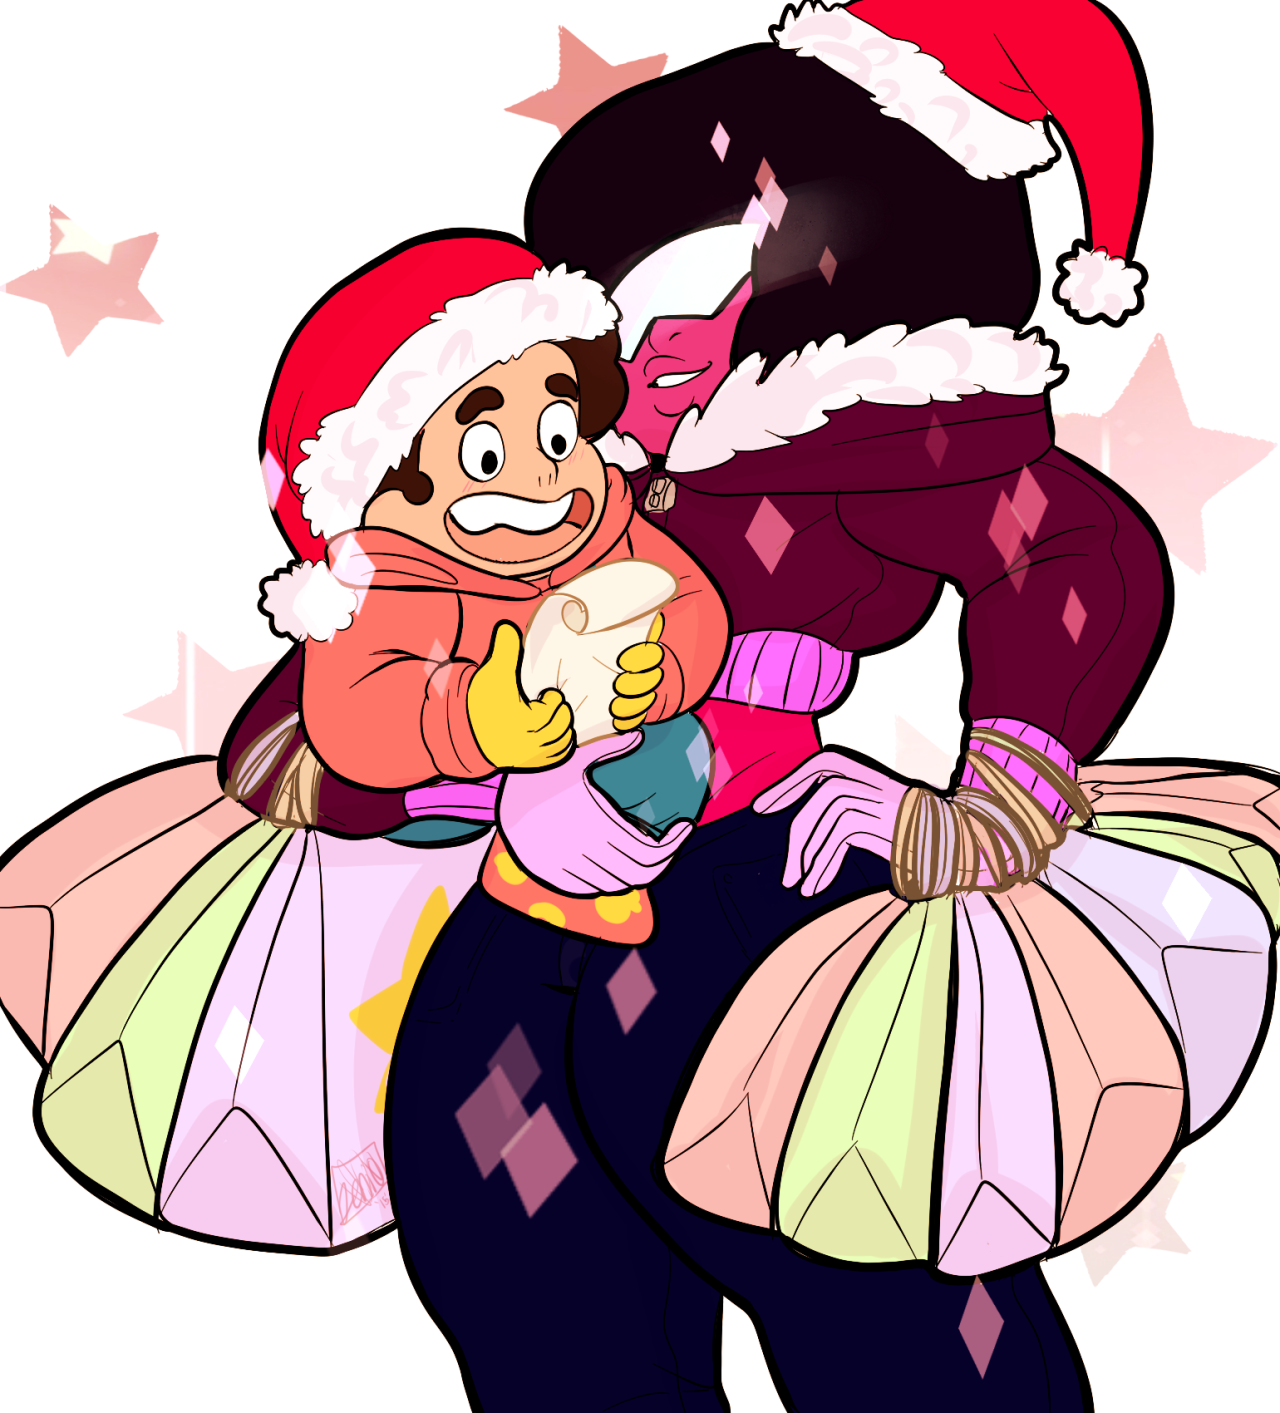 They’re going Christmas shopping together because Steven wants to get a buncha